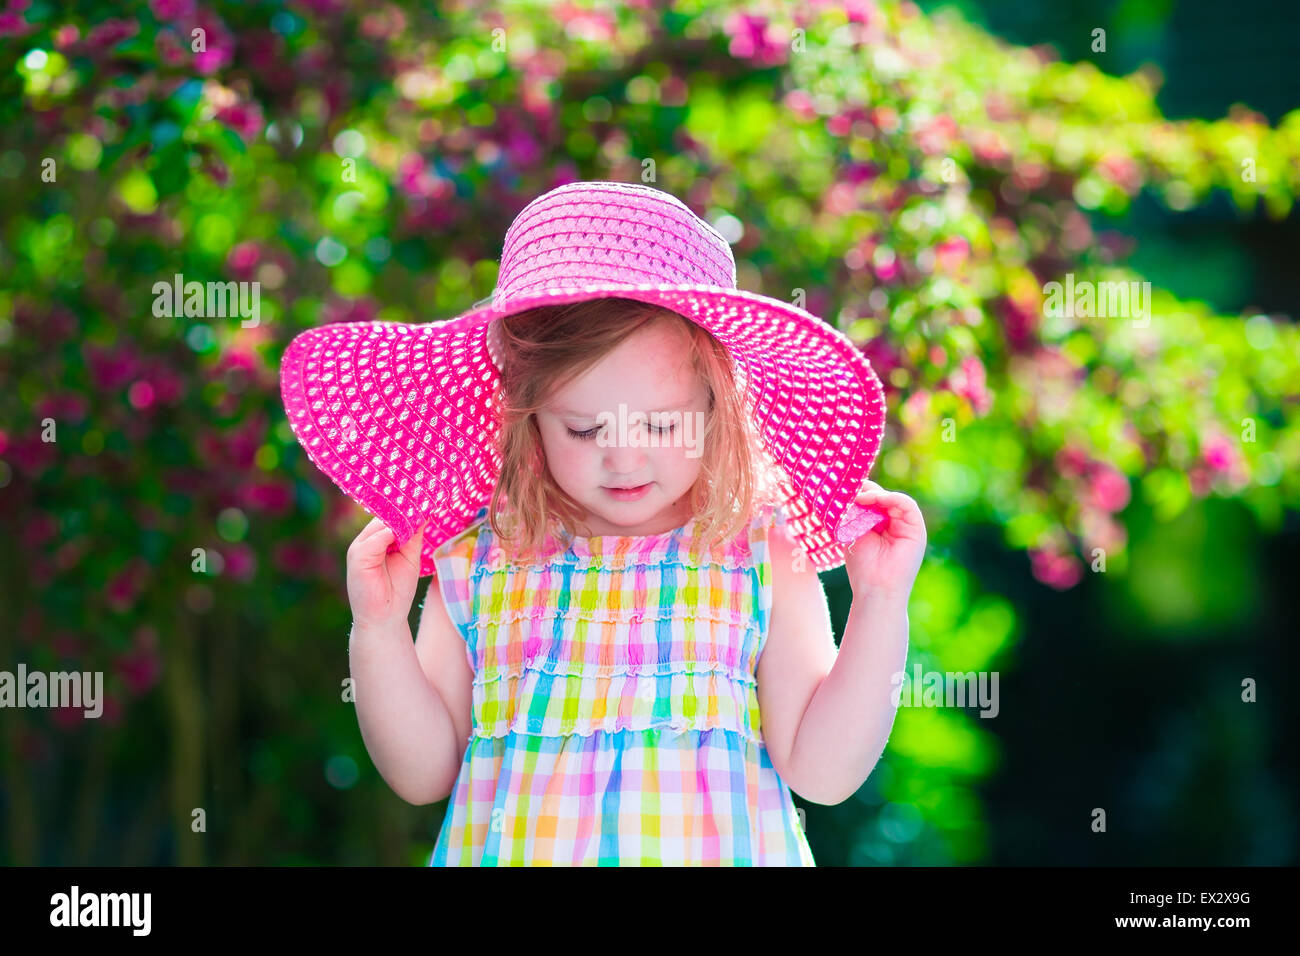 Little cute girl with flowers. Child wearing a pink hat playing in a blooming summer garden. Kids gardening. Stock Photo